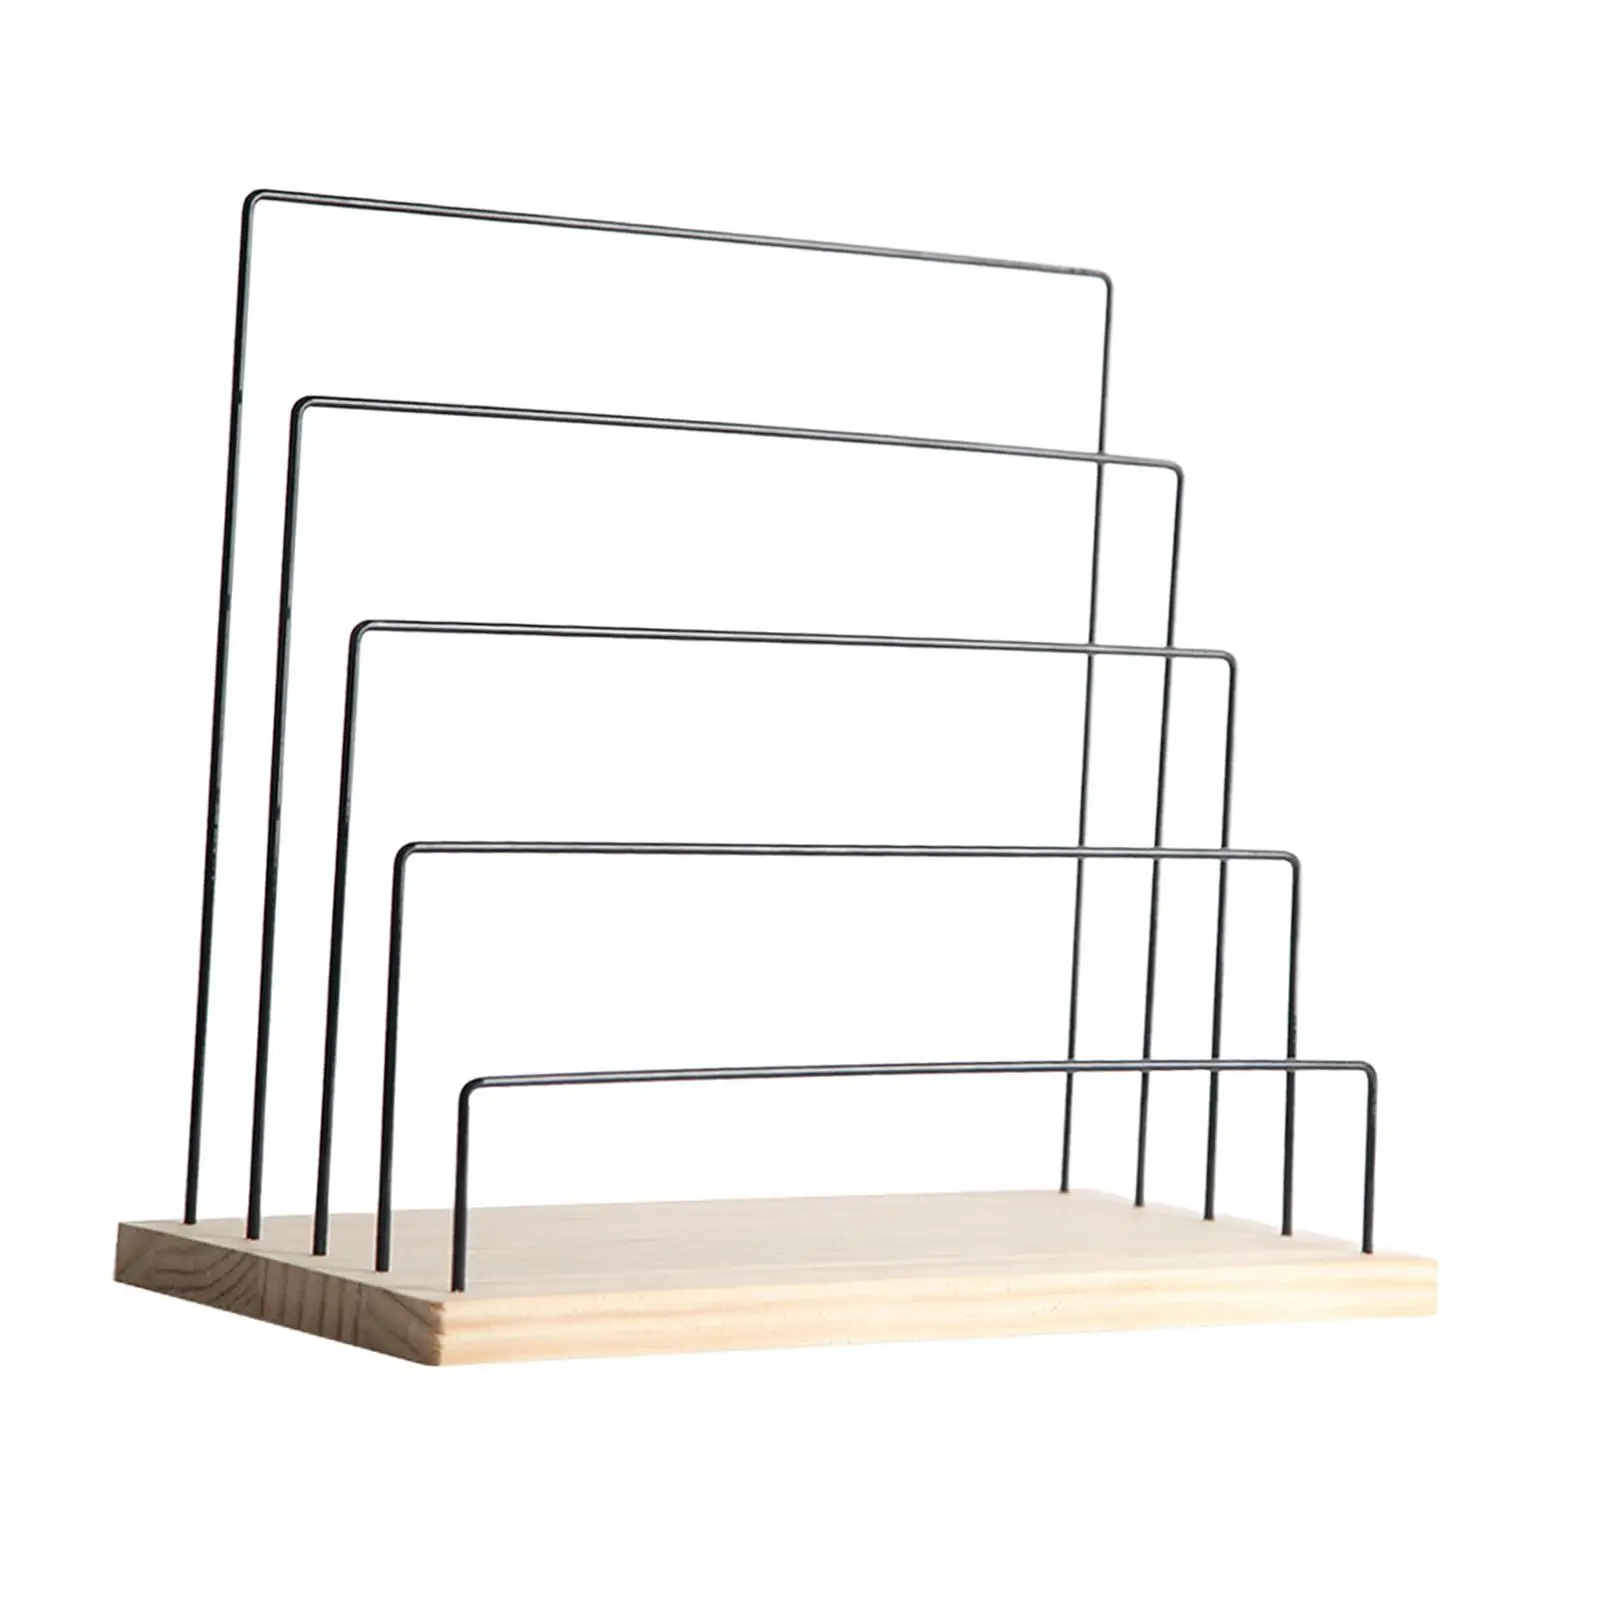 Earring Organizer Multi Tiers Wooden Base Earring Holder Bracelet Necklace Display Holder for Shows Showcase Stores Countertop